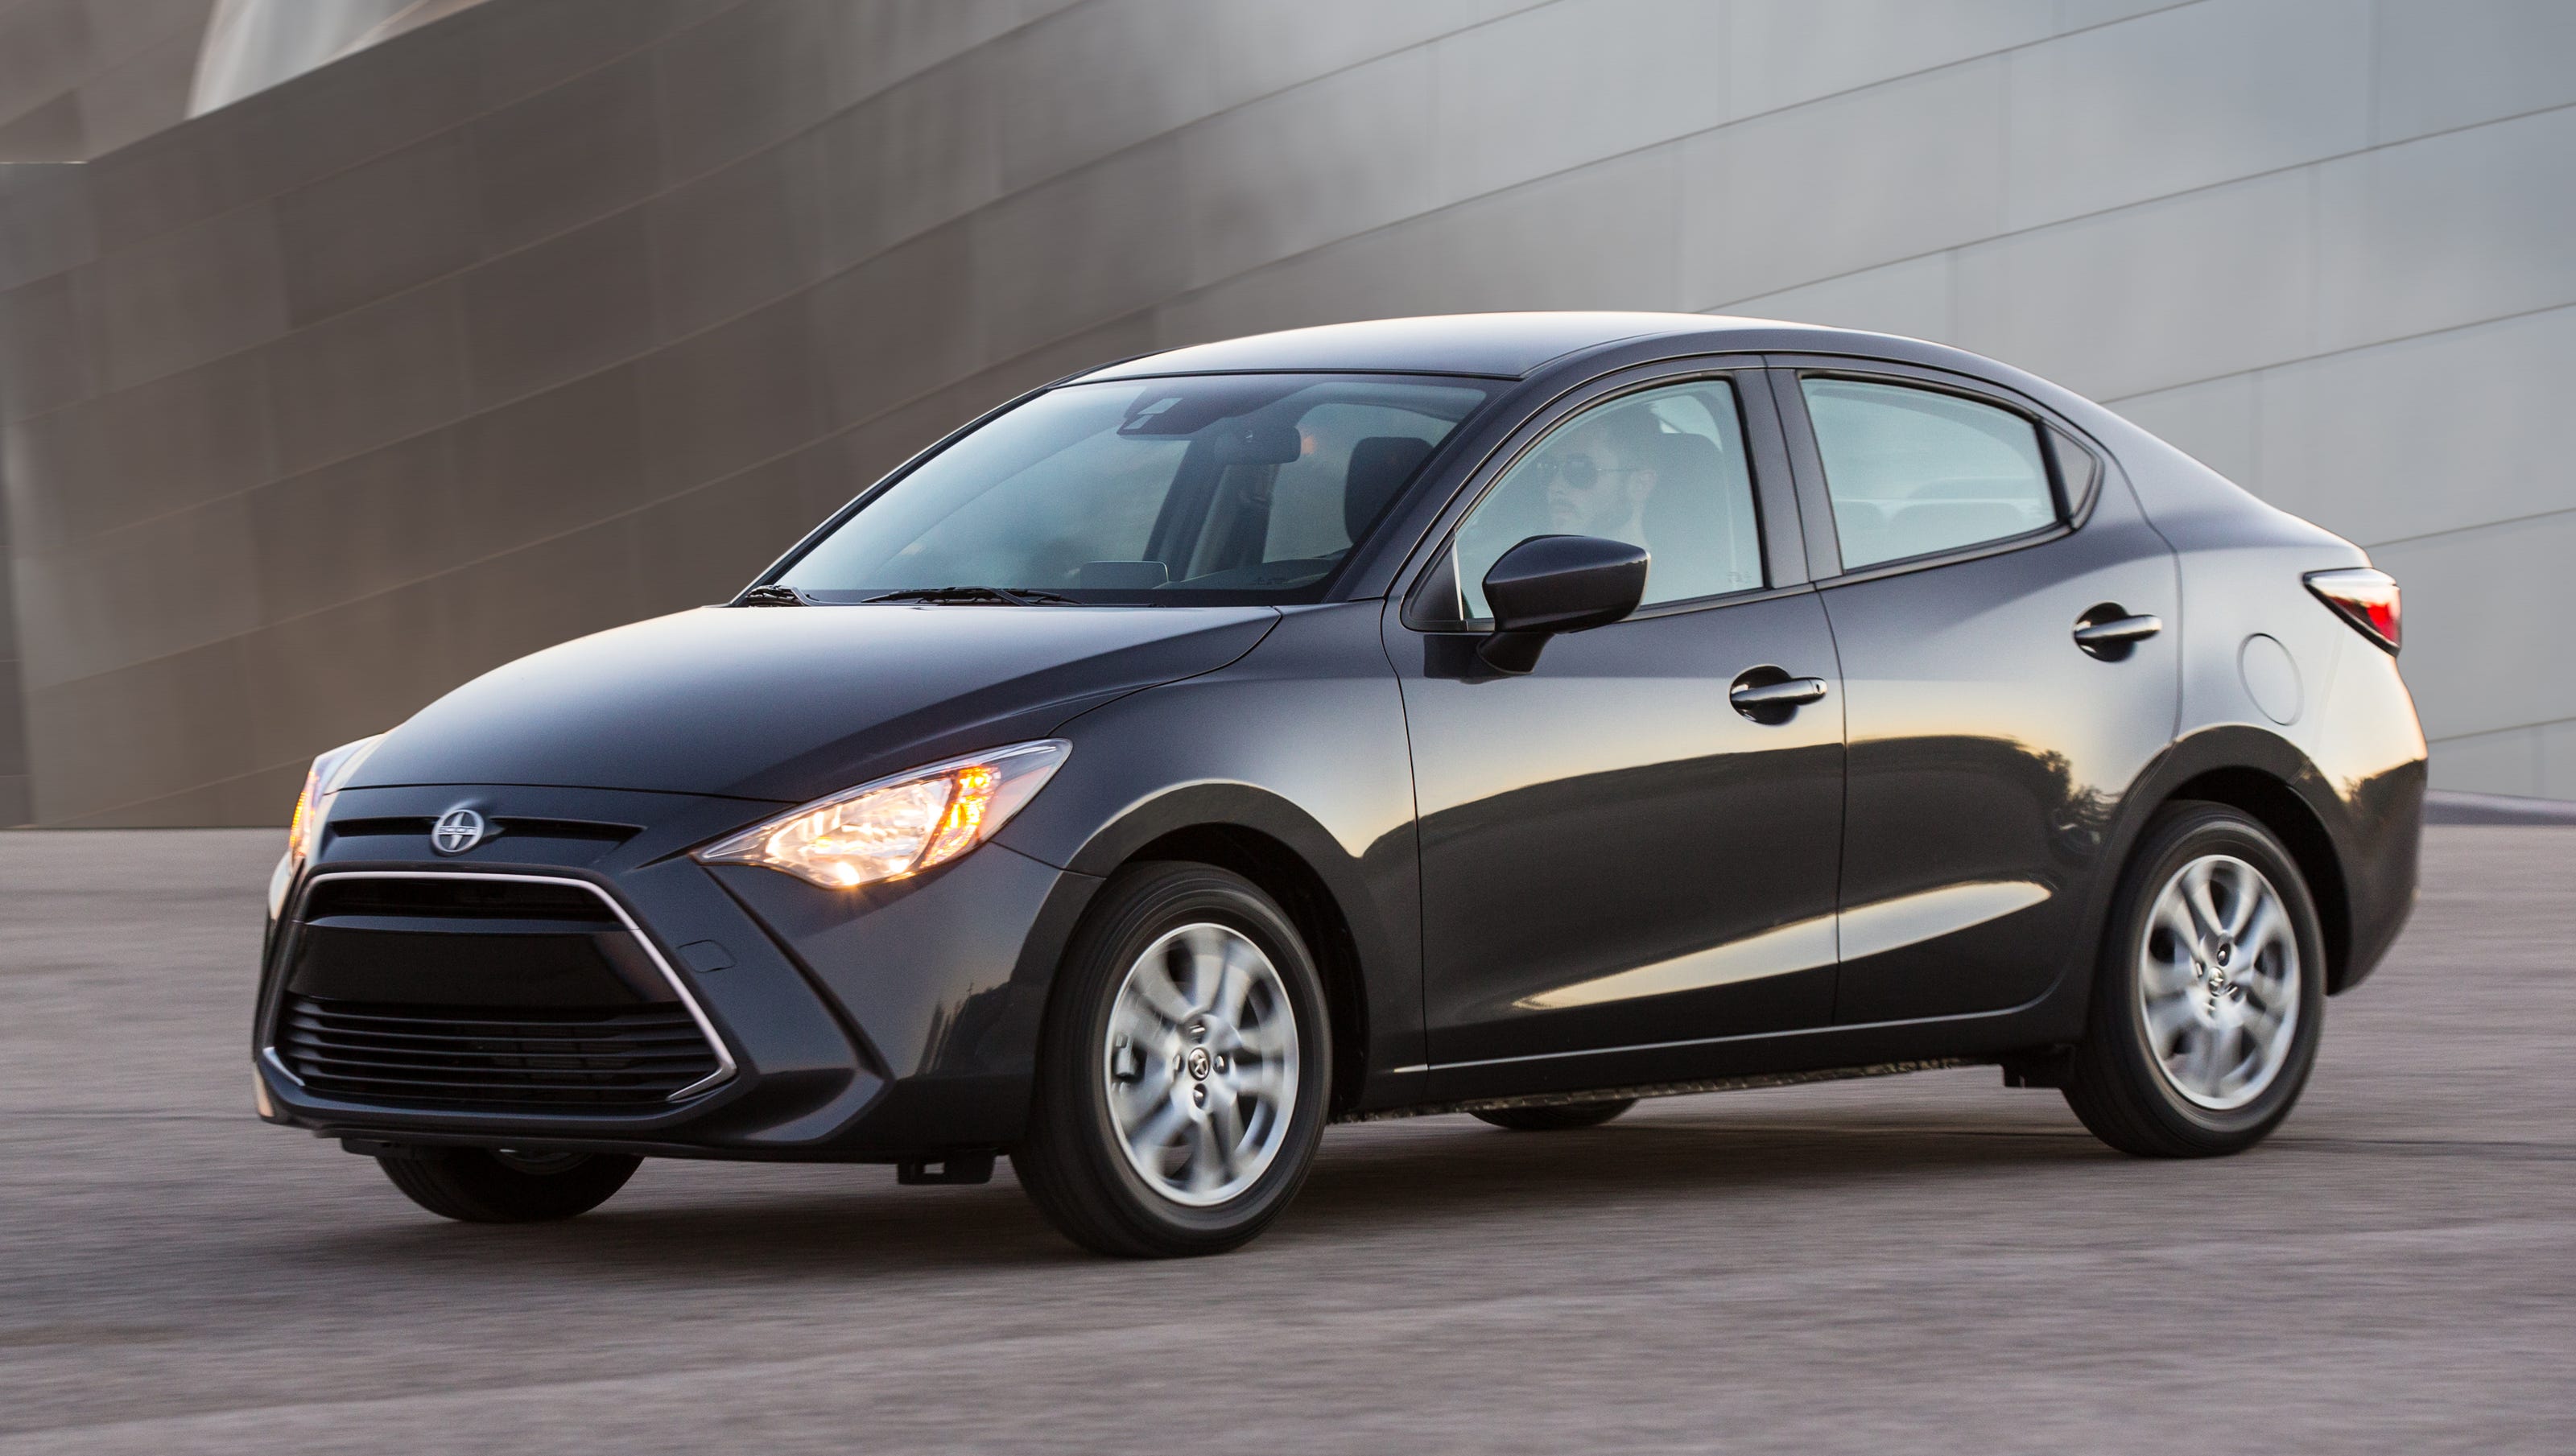 2016 Scion iA review: Features, value overpower weak engine